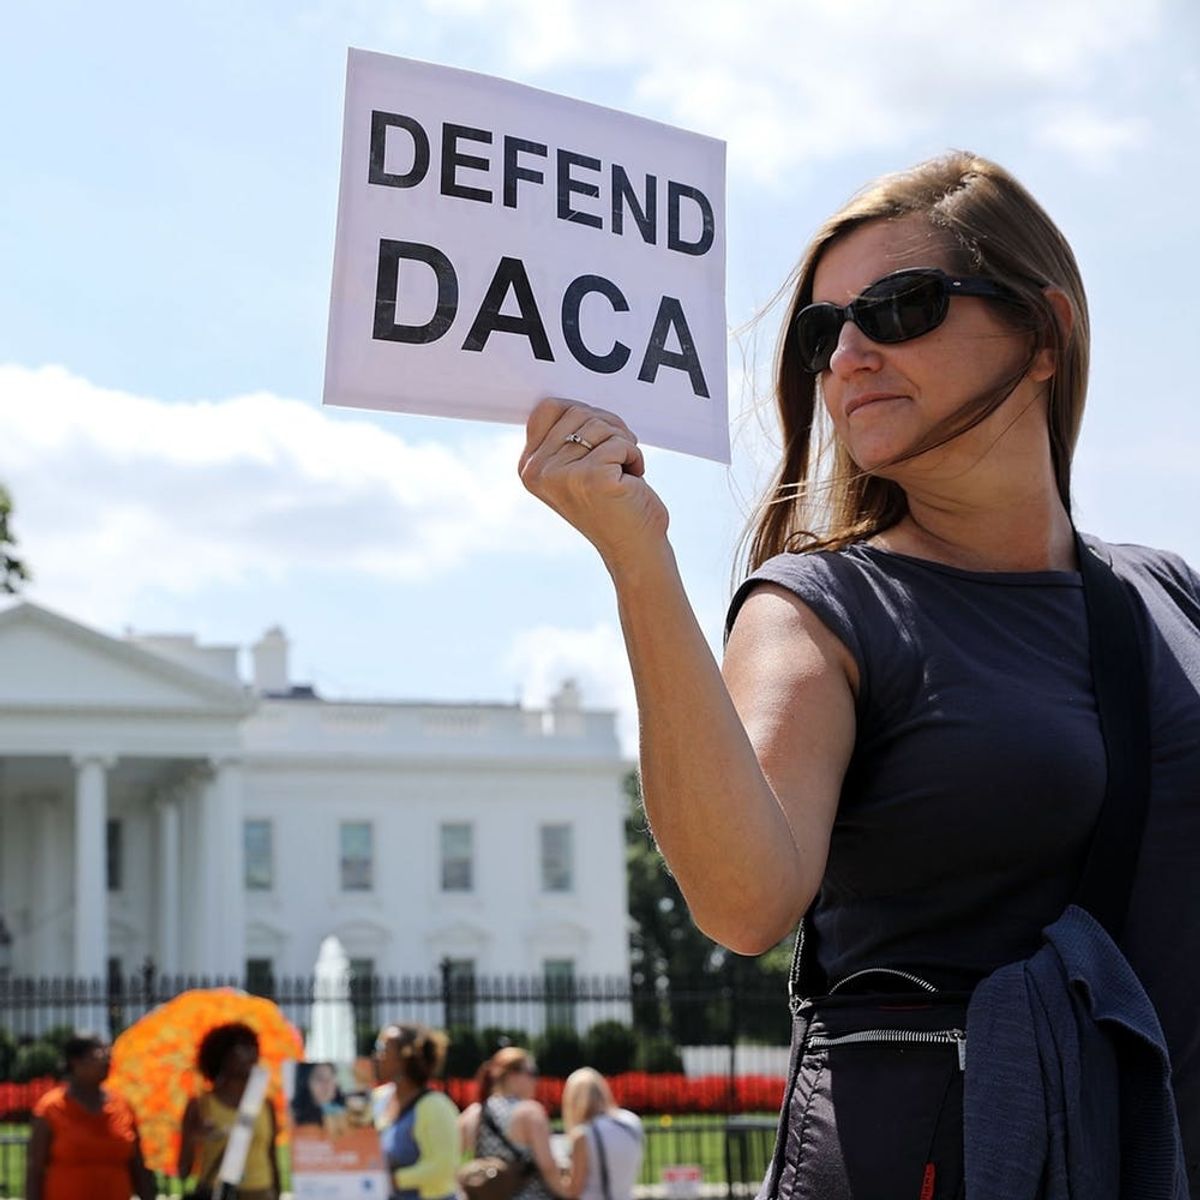 San Francisco Judge Rules That DACA Must Remain (for Now)